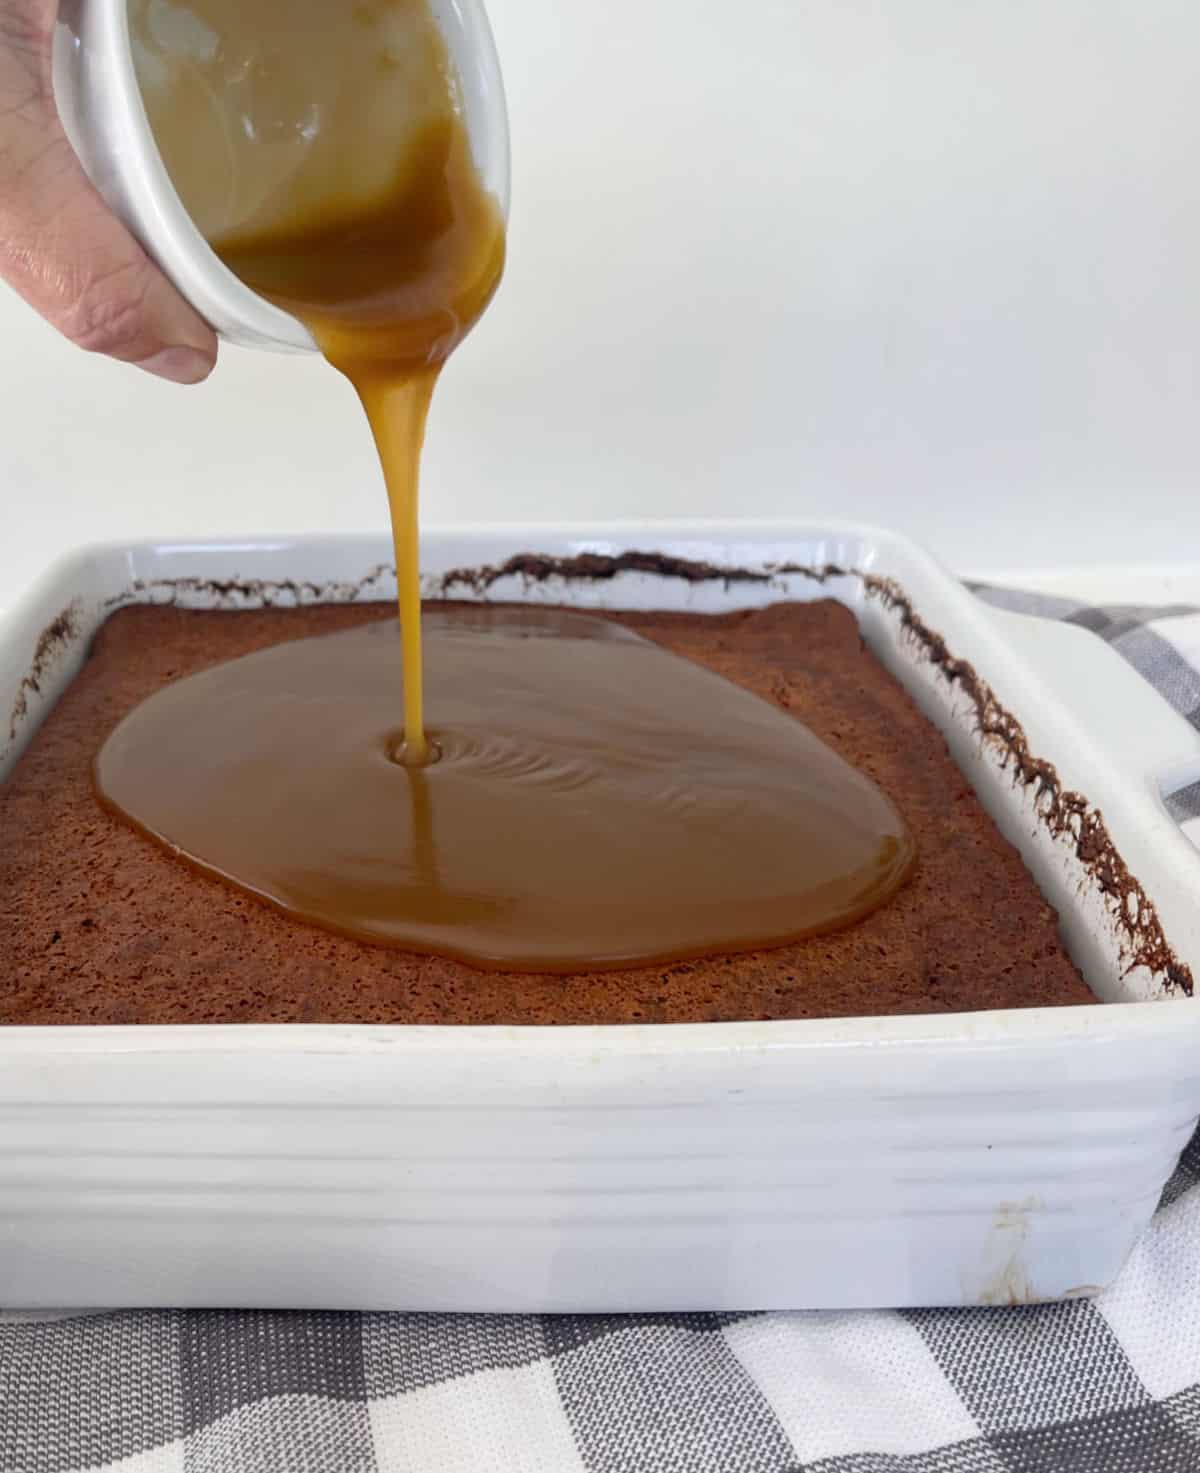 Caramel sauce being poured over the top of sticky date pudding.